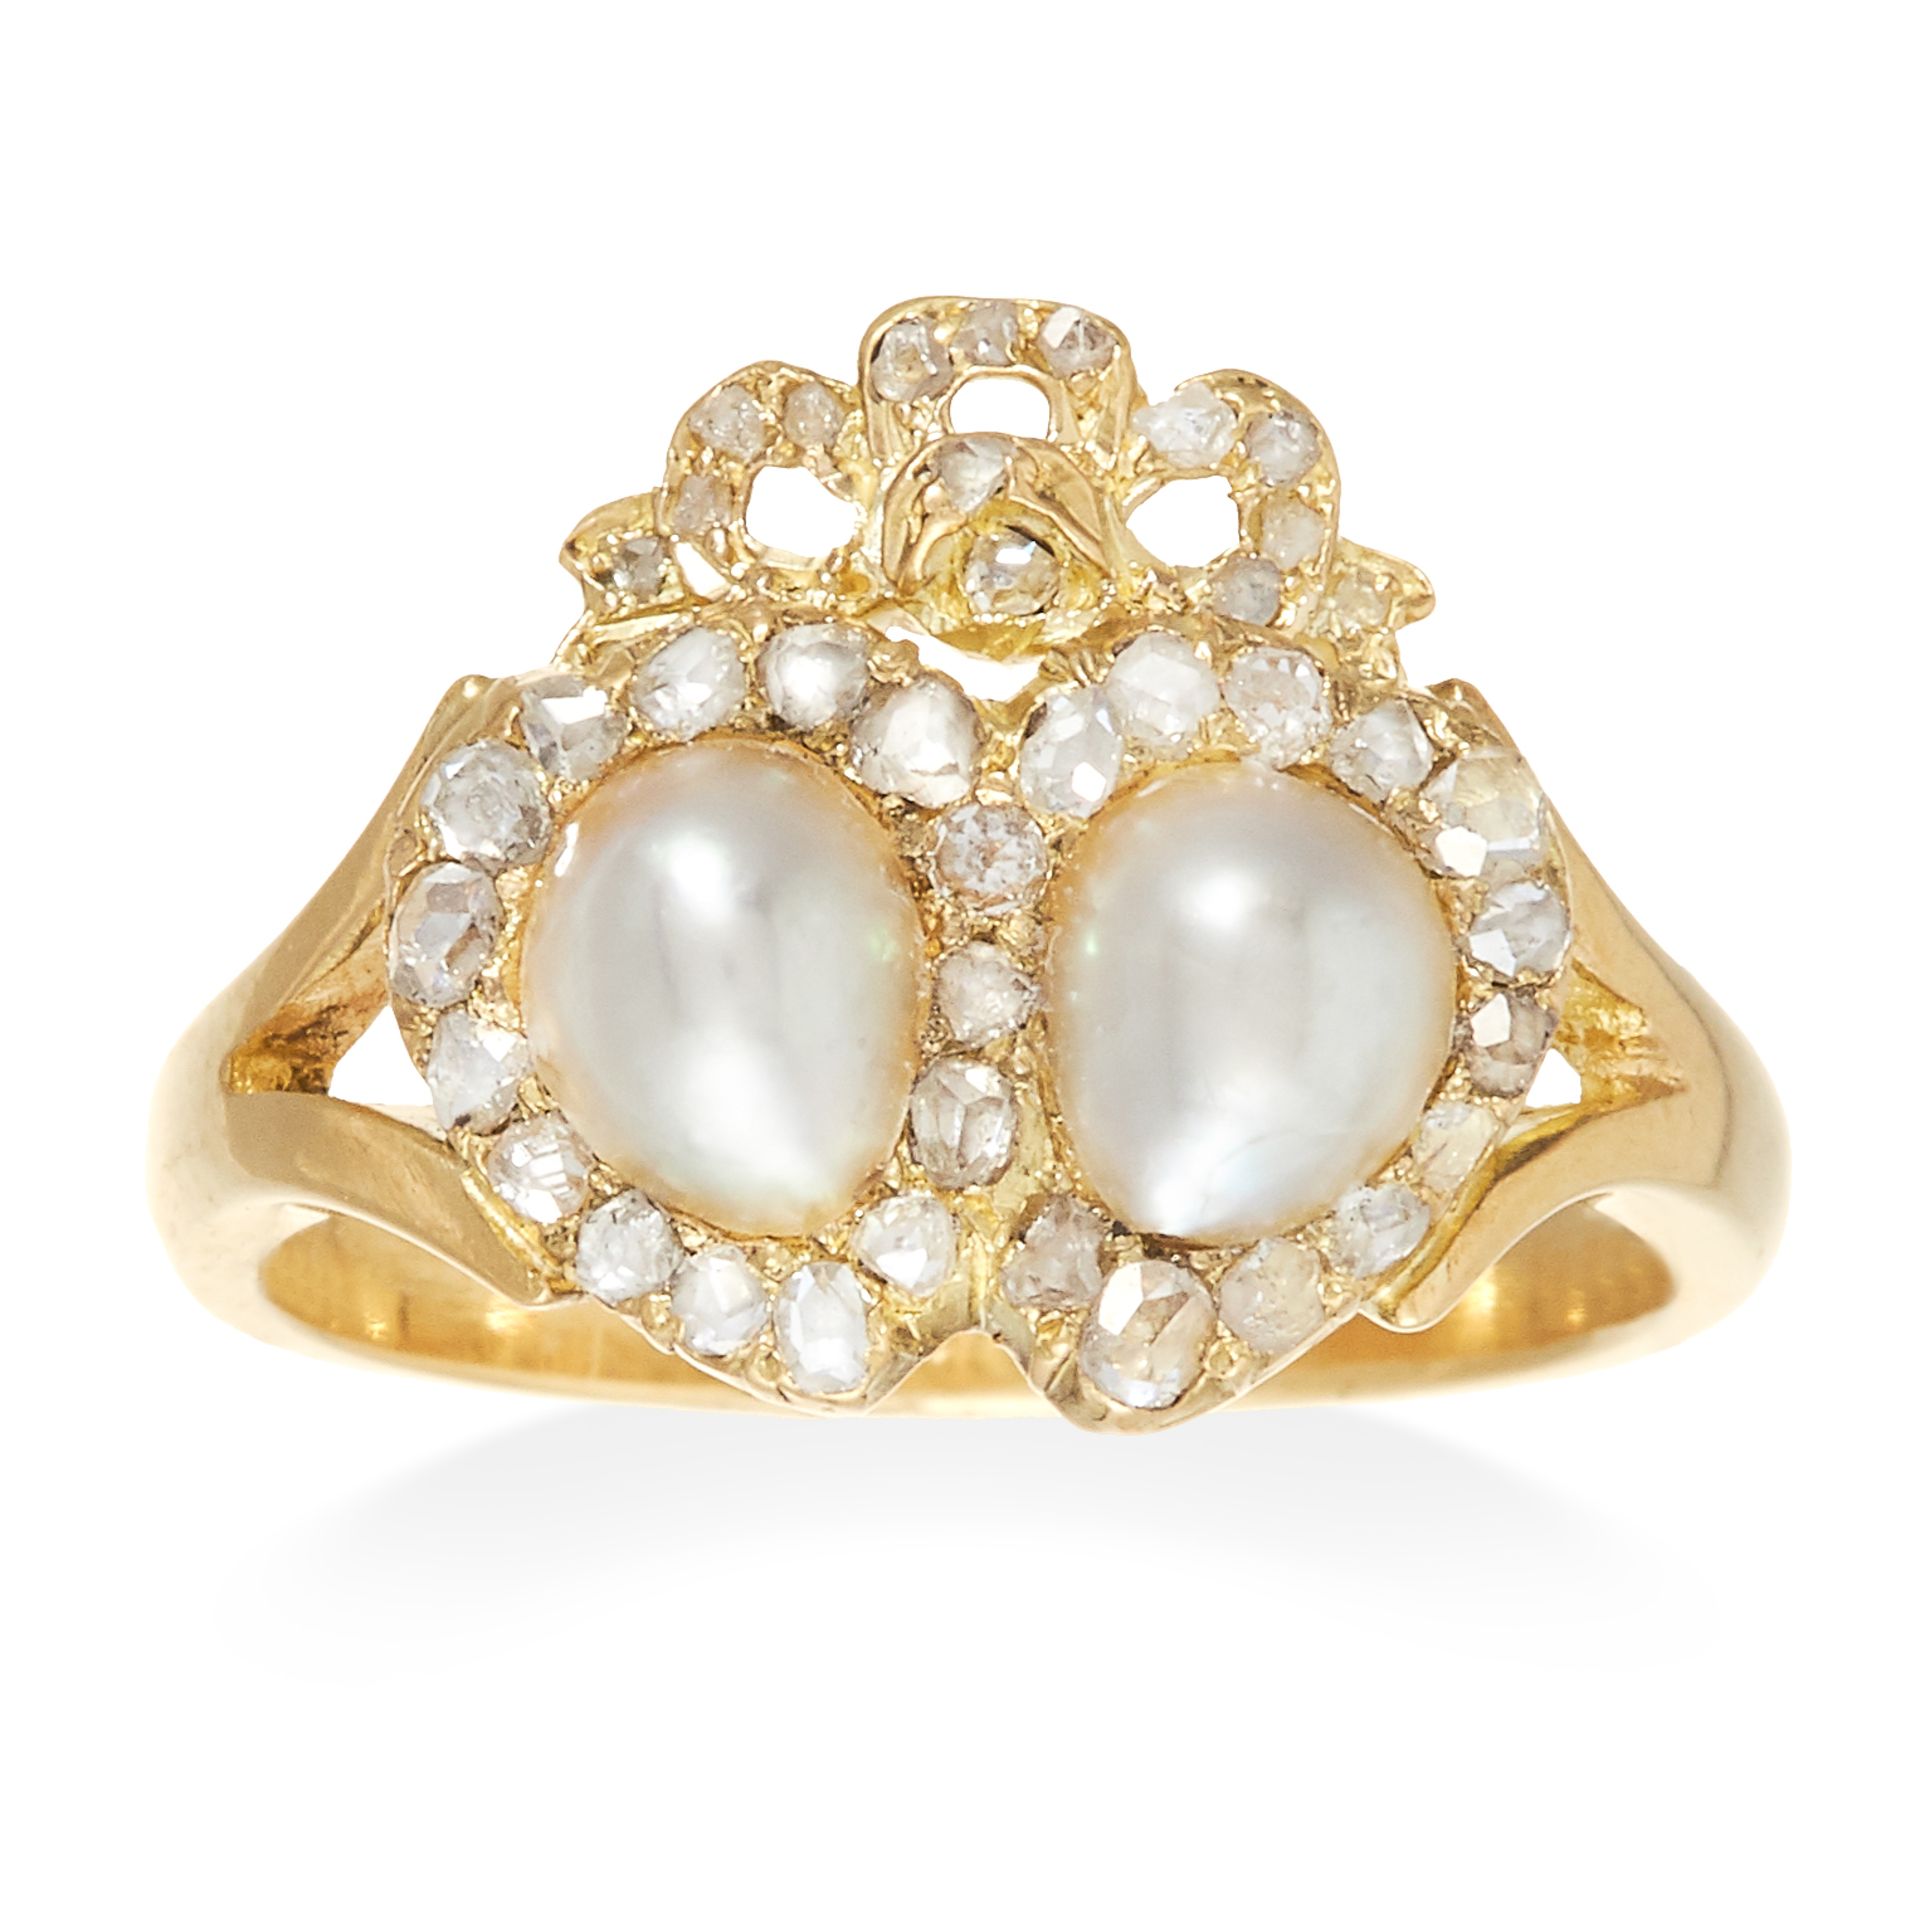 A PEARL AND DIAMOND SWEETHEART BROOCH in yellow gold, set with two pearls surrounded by rose cut